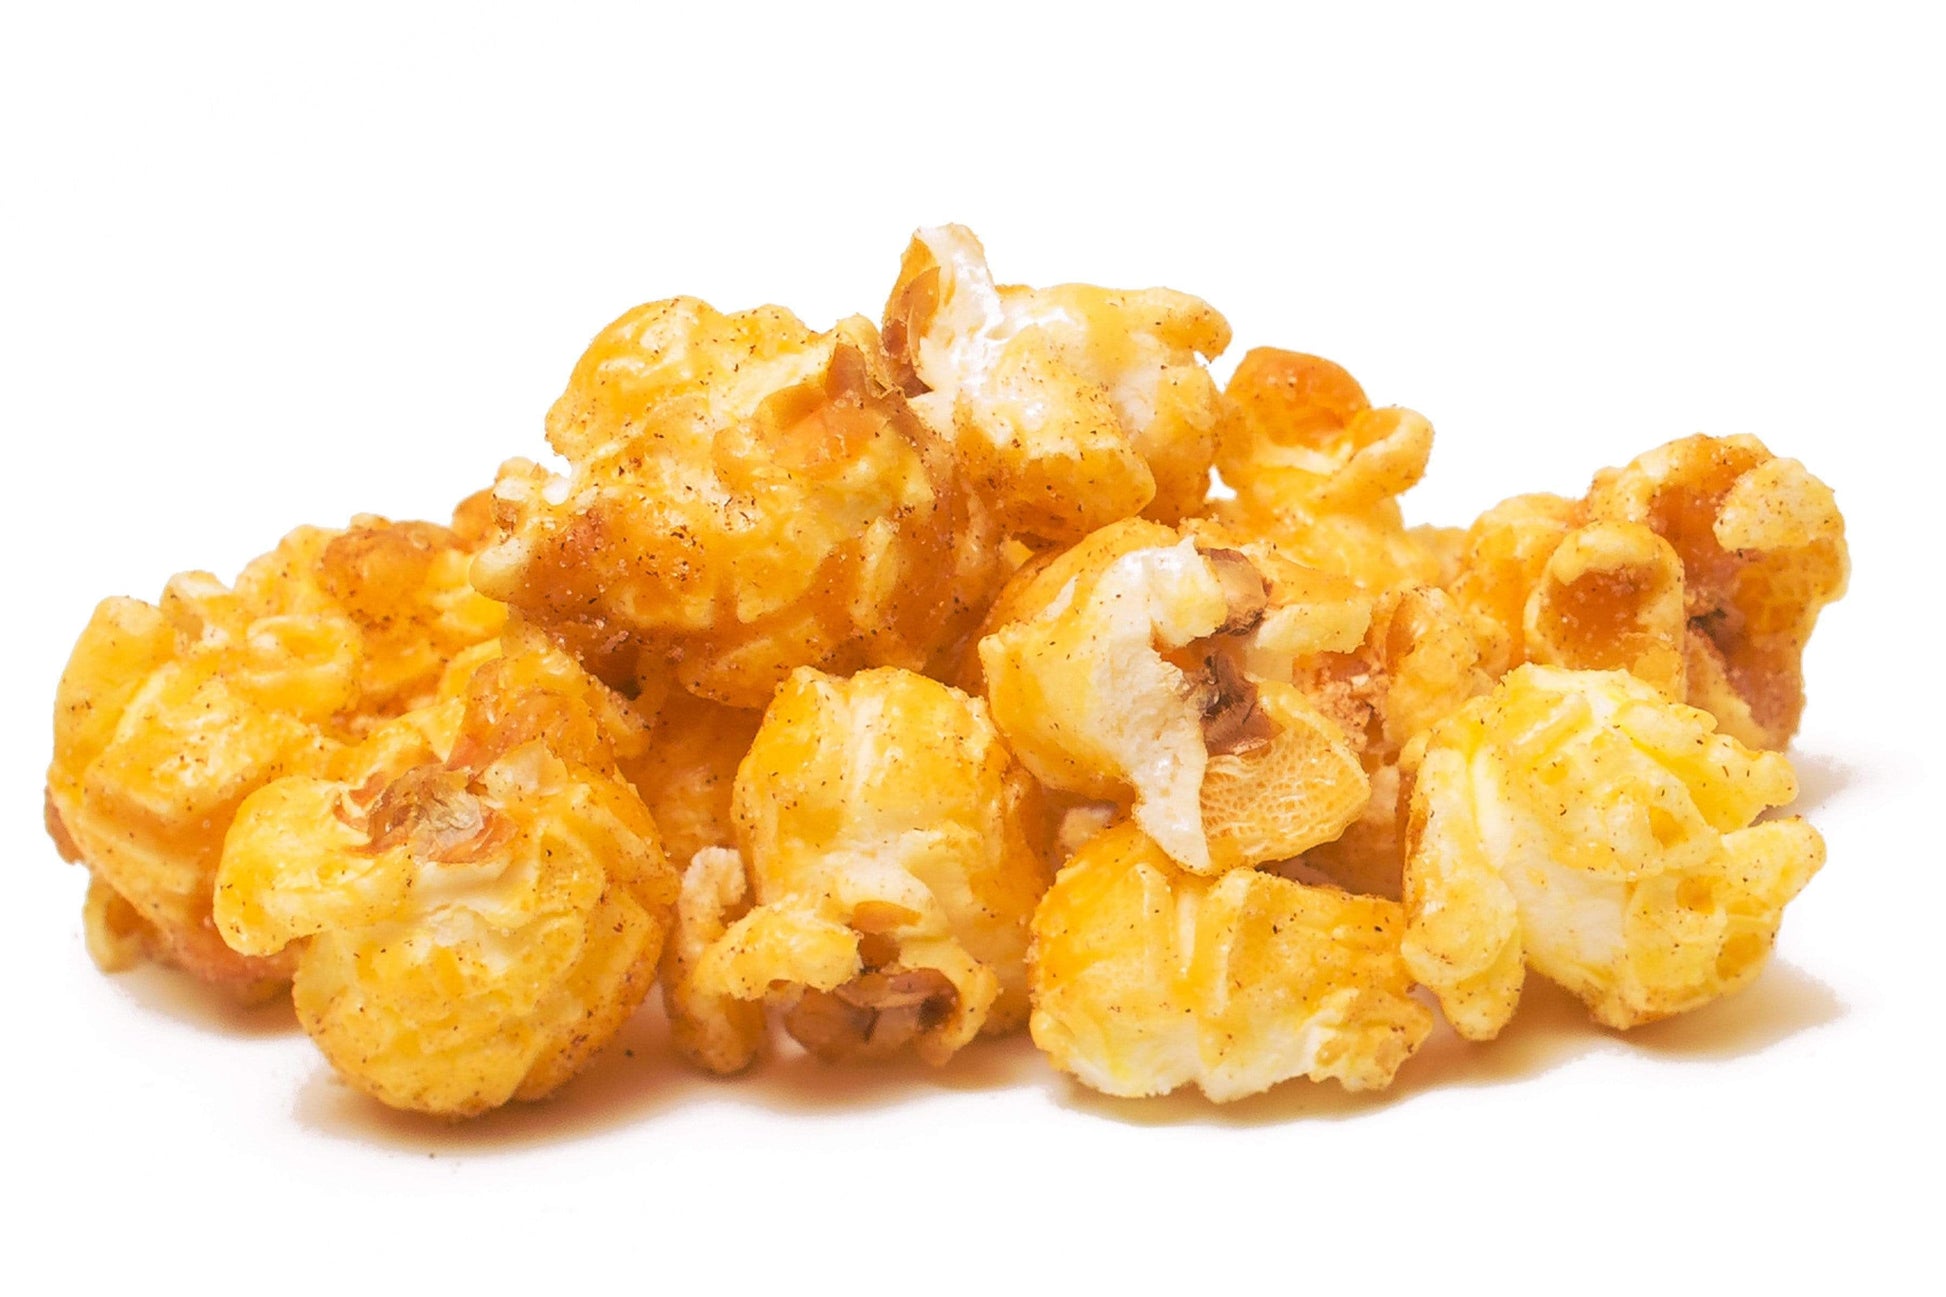 popped las vegas gourmet popcorn Irresistible Gourmet Caramel Corn Infused with Cinnamon & Sugar! Elevate Your Snack Experience with this Decadent Combination of Sweet Flavors. Handcrafted to Perfection with Premium Ingredients for Optimal Taste and Crunch. Indulge Your Cravings with this Unique Twist on Classic Caramel Corn. Order Now for a Truly Memorable Snacking Delight